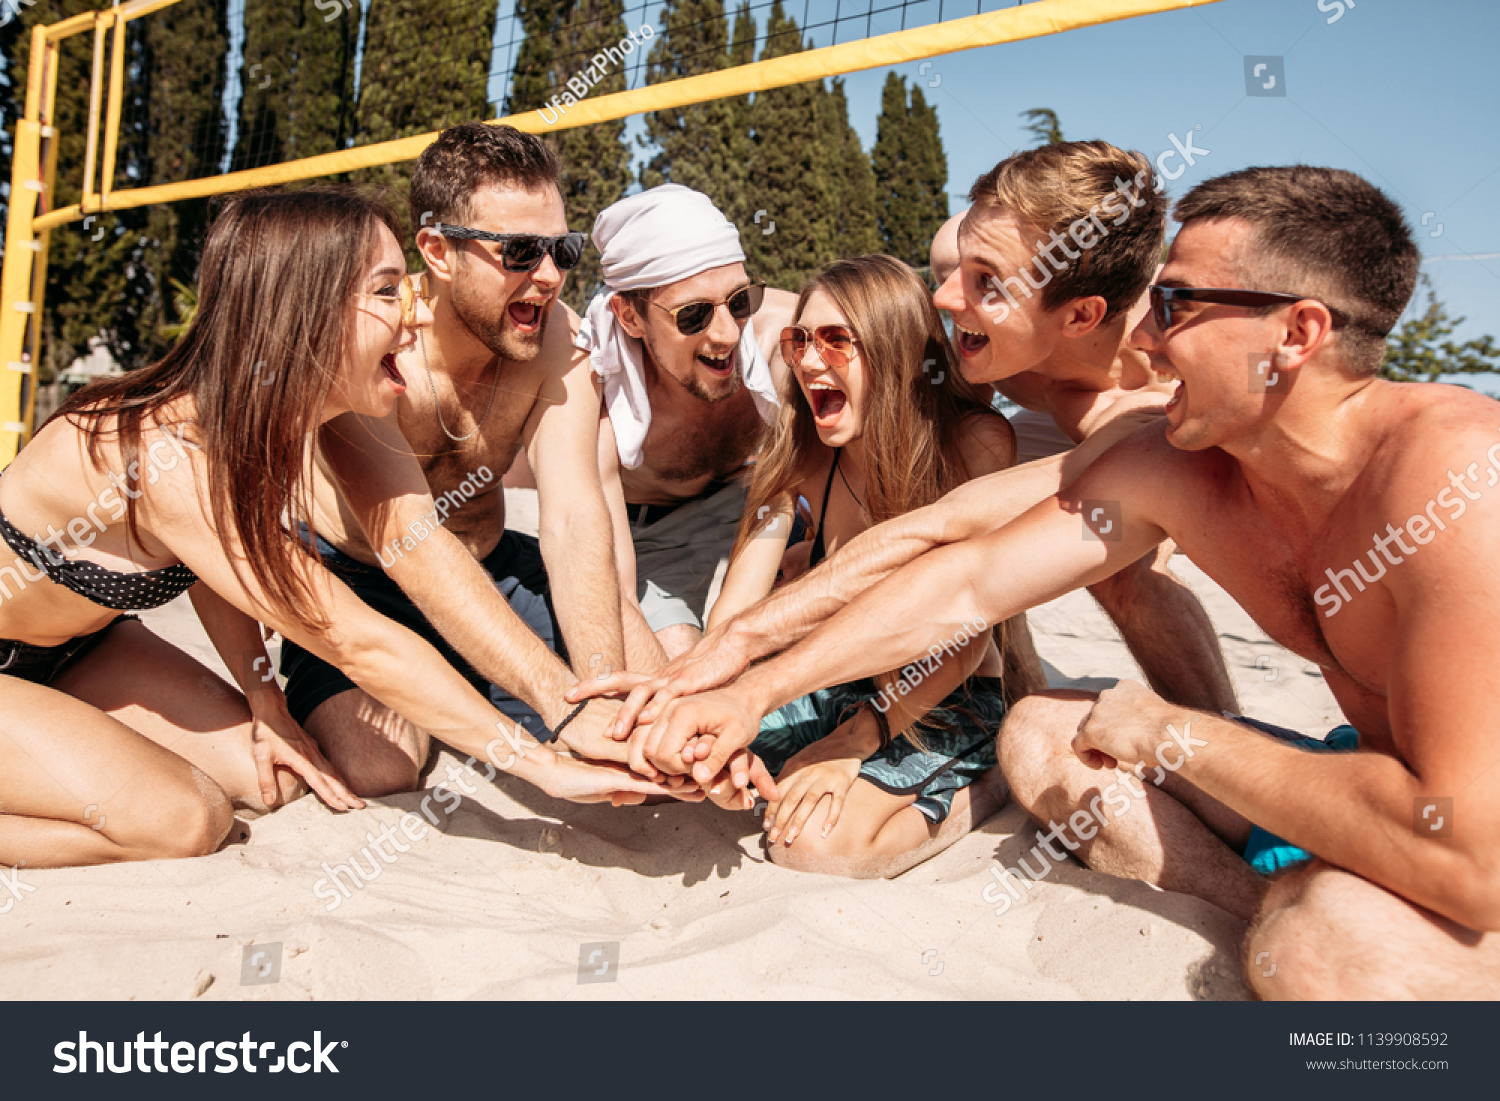 Give high five. Group of fit excited caucasian people talking in a circle, sitting on sand after volleyball game won. discussing goal, achieving team results. Teamwork, vacation, active life benefit #1139908592